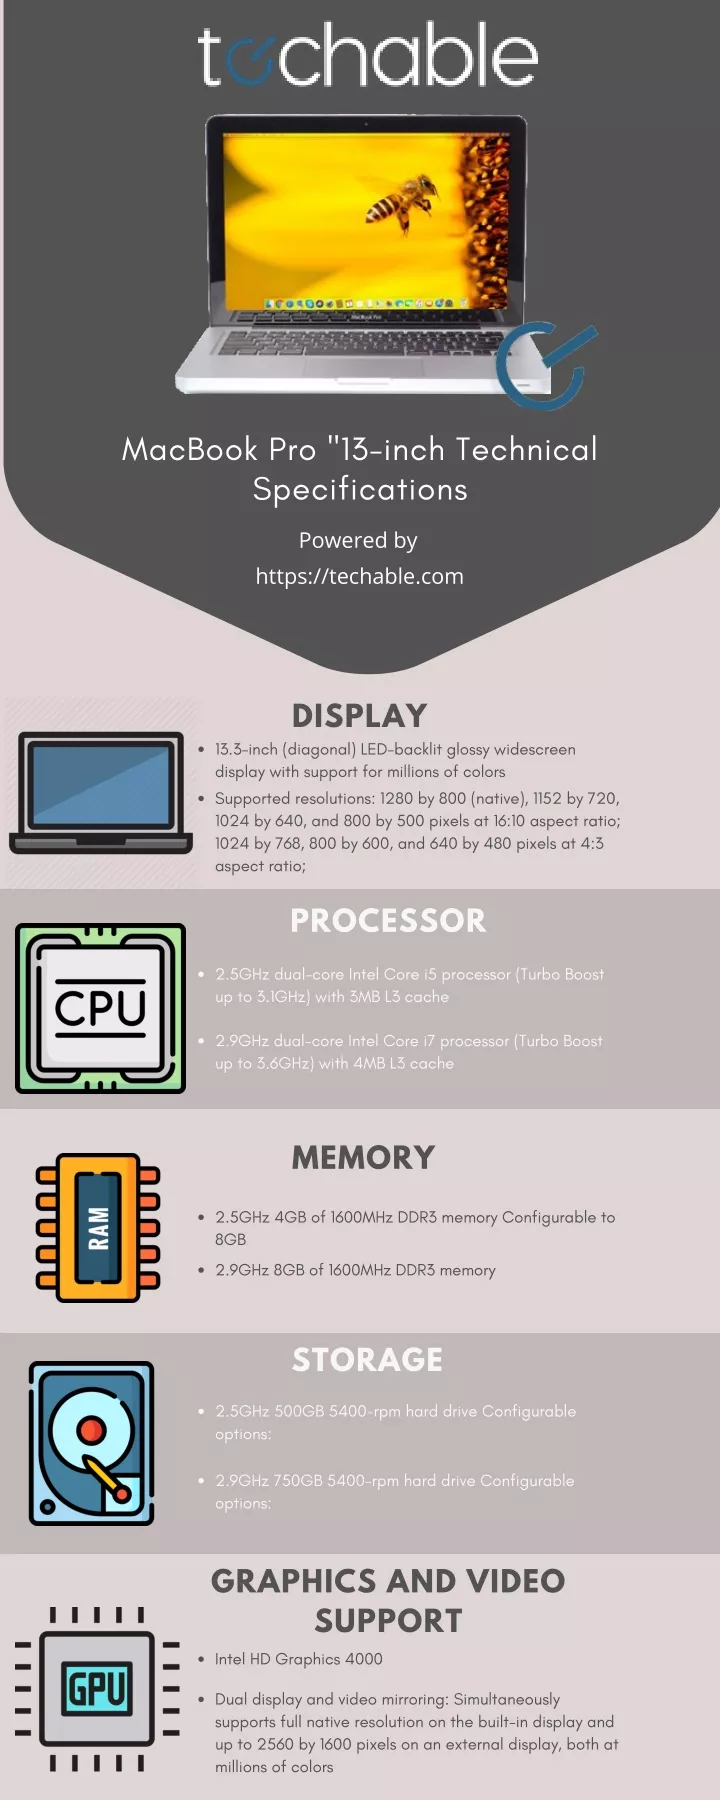 macbook pro 13 inch technical specifications